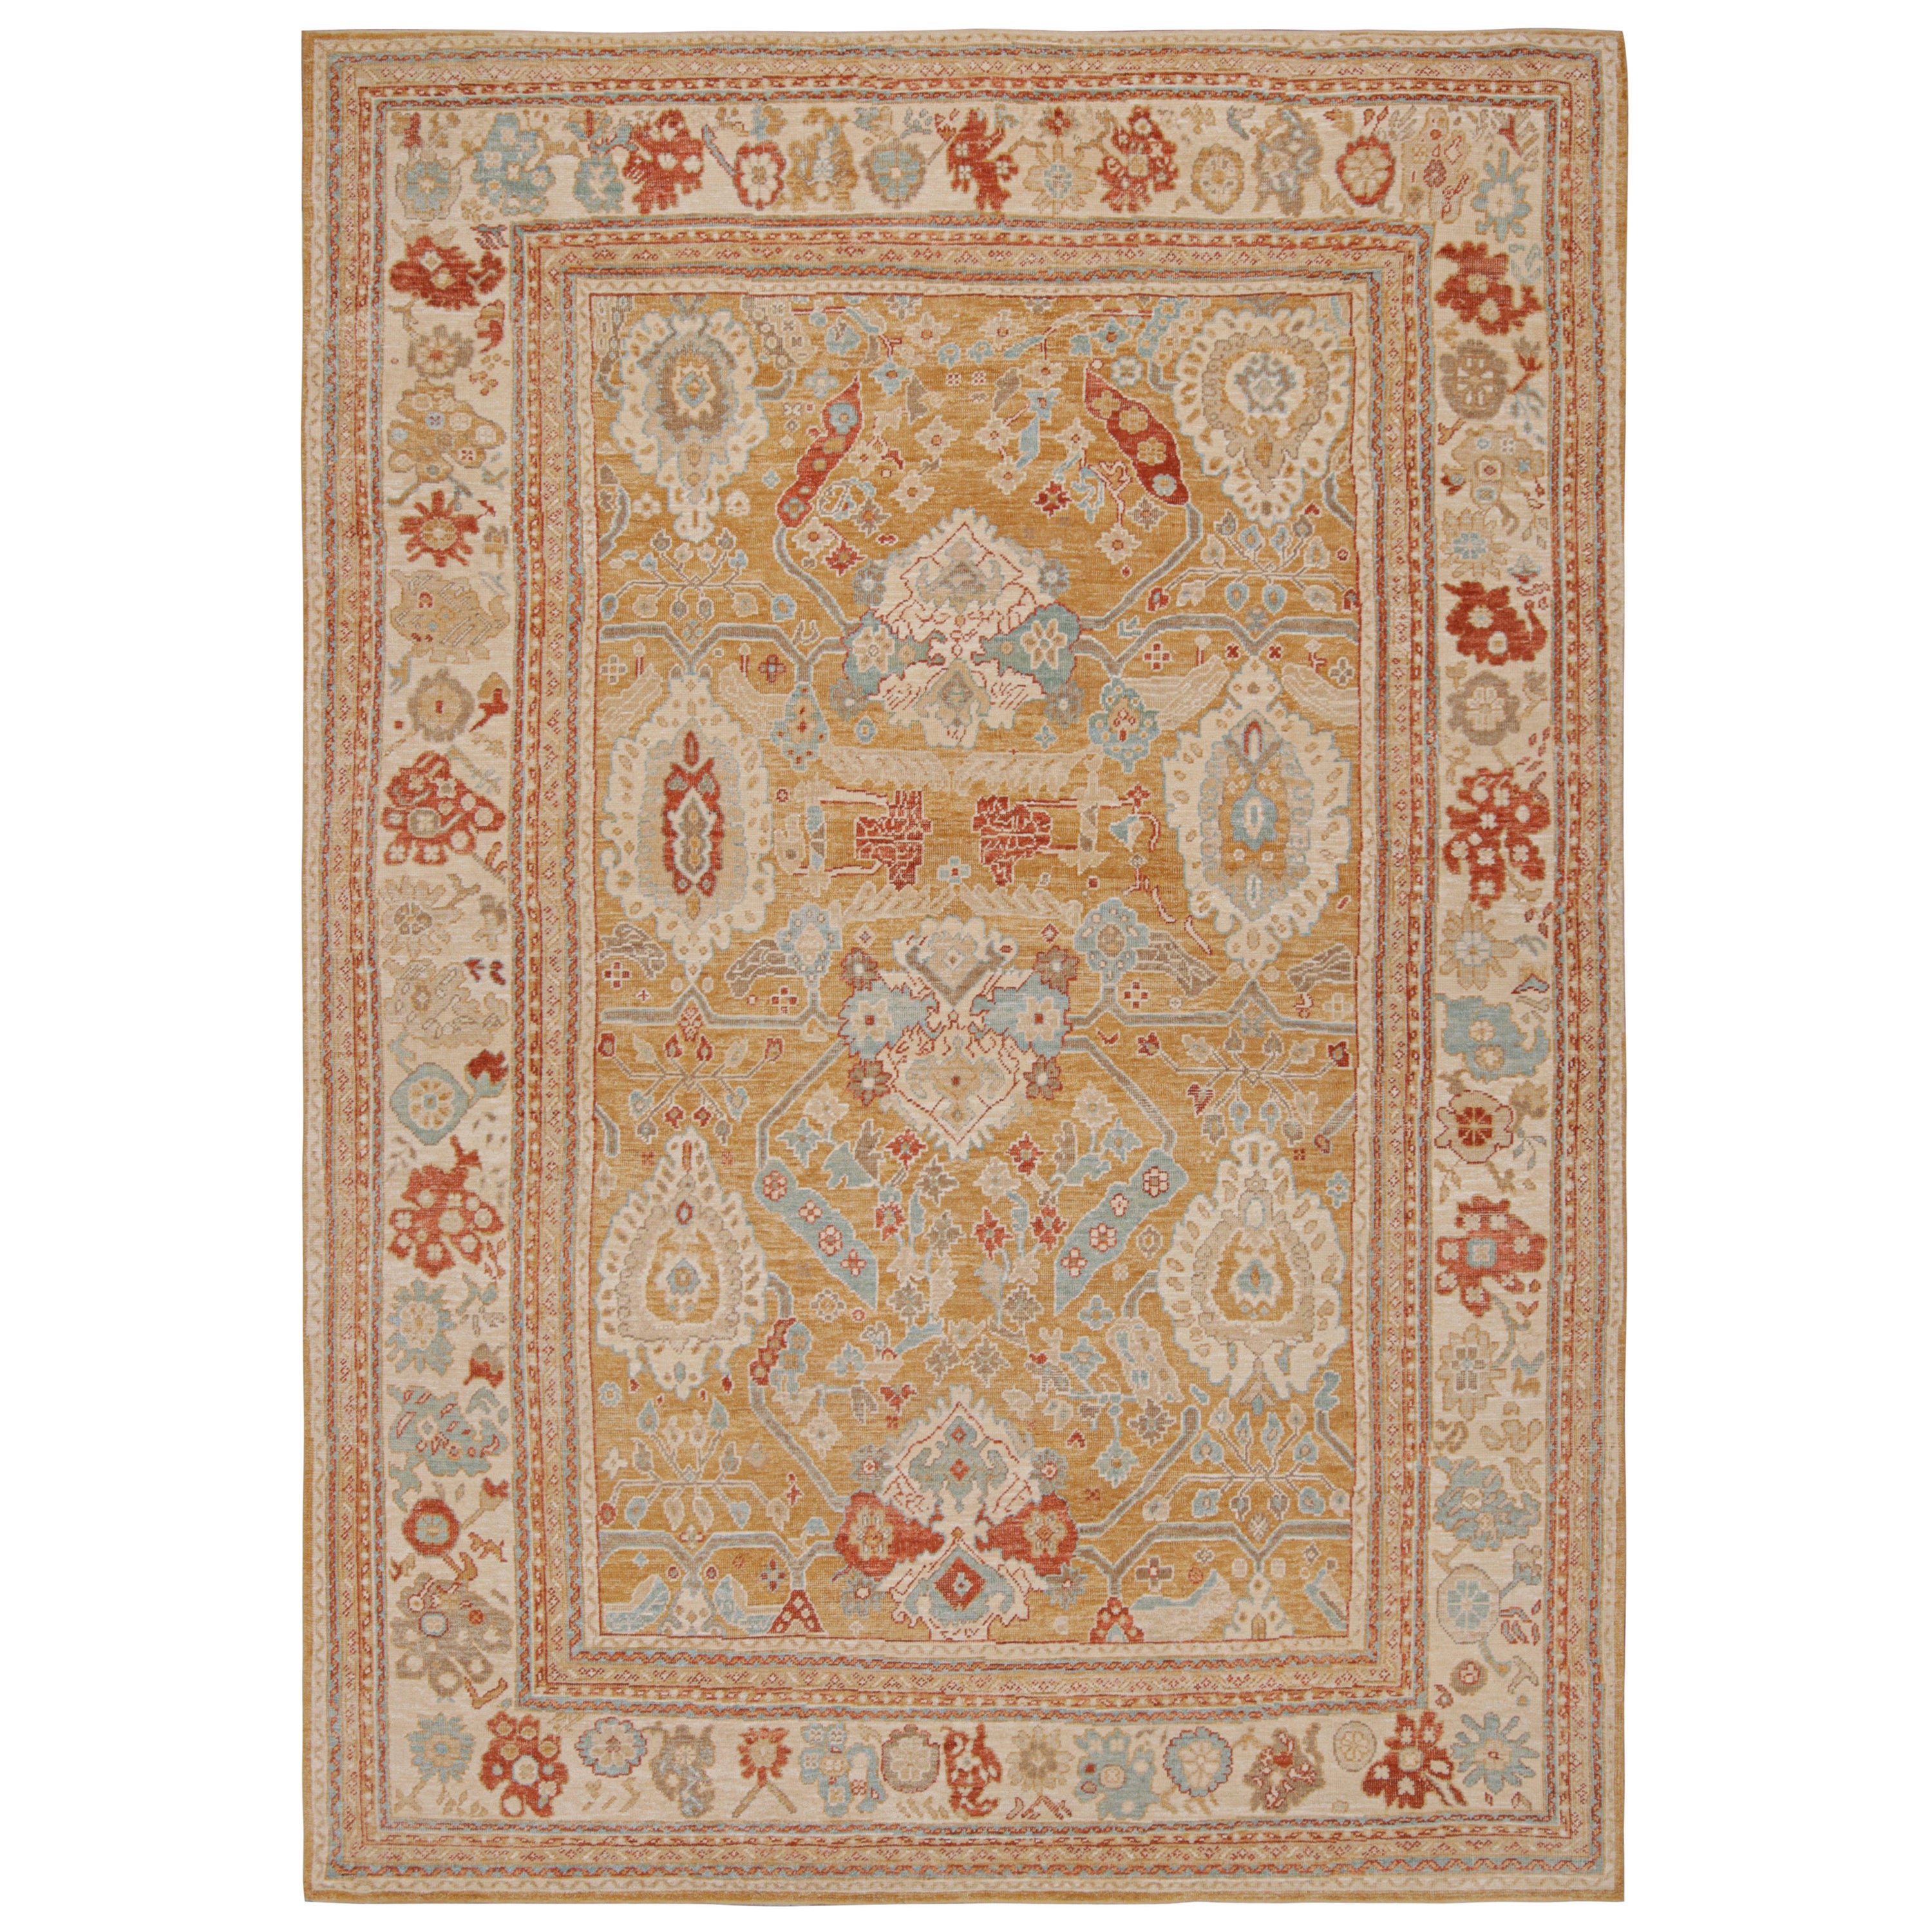 Rug & Kilim’s Oushak Style Rug in Gold and Beige with Floral Patterns